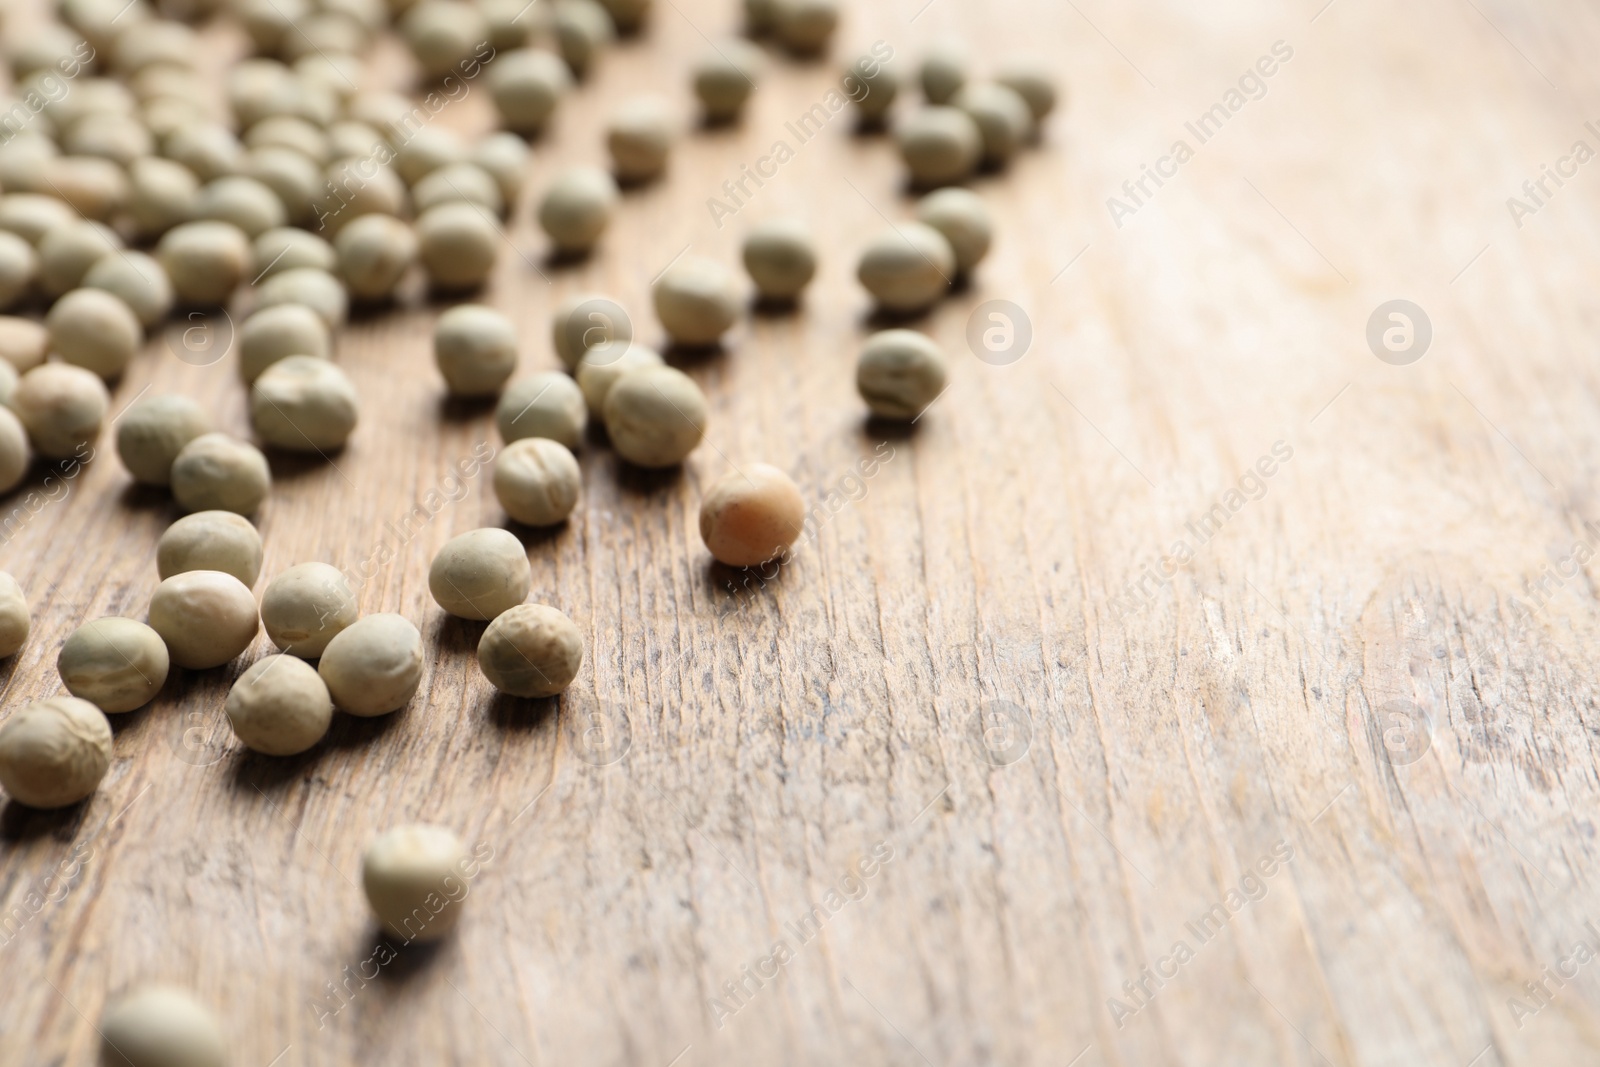 Photo of Raw dry peas on wooden background, closeup with space for text. Vegetable seeds